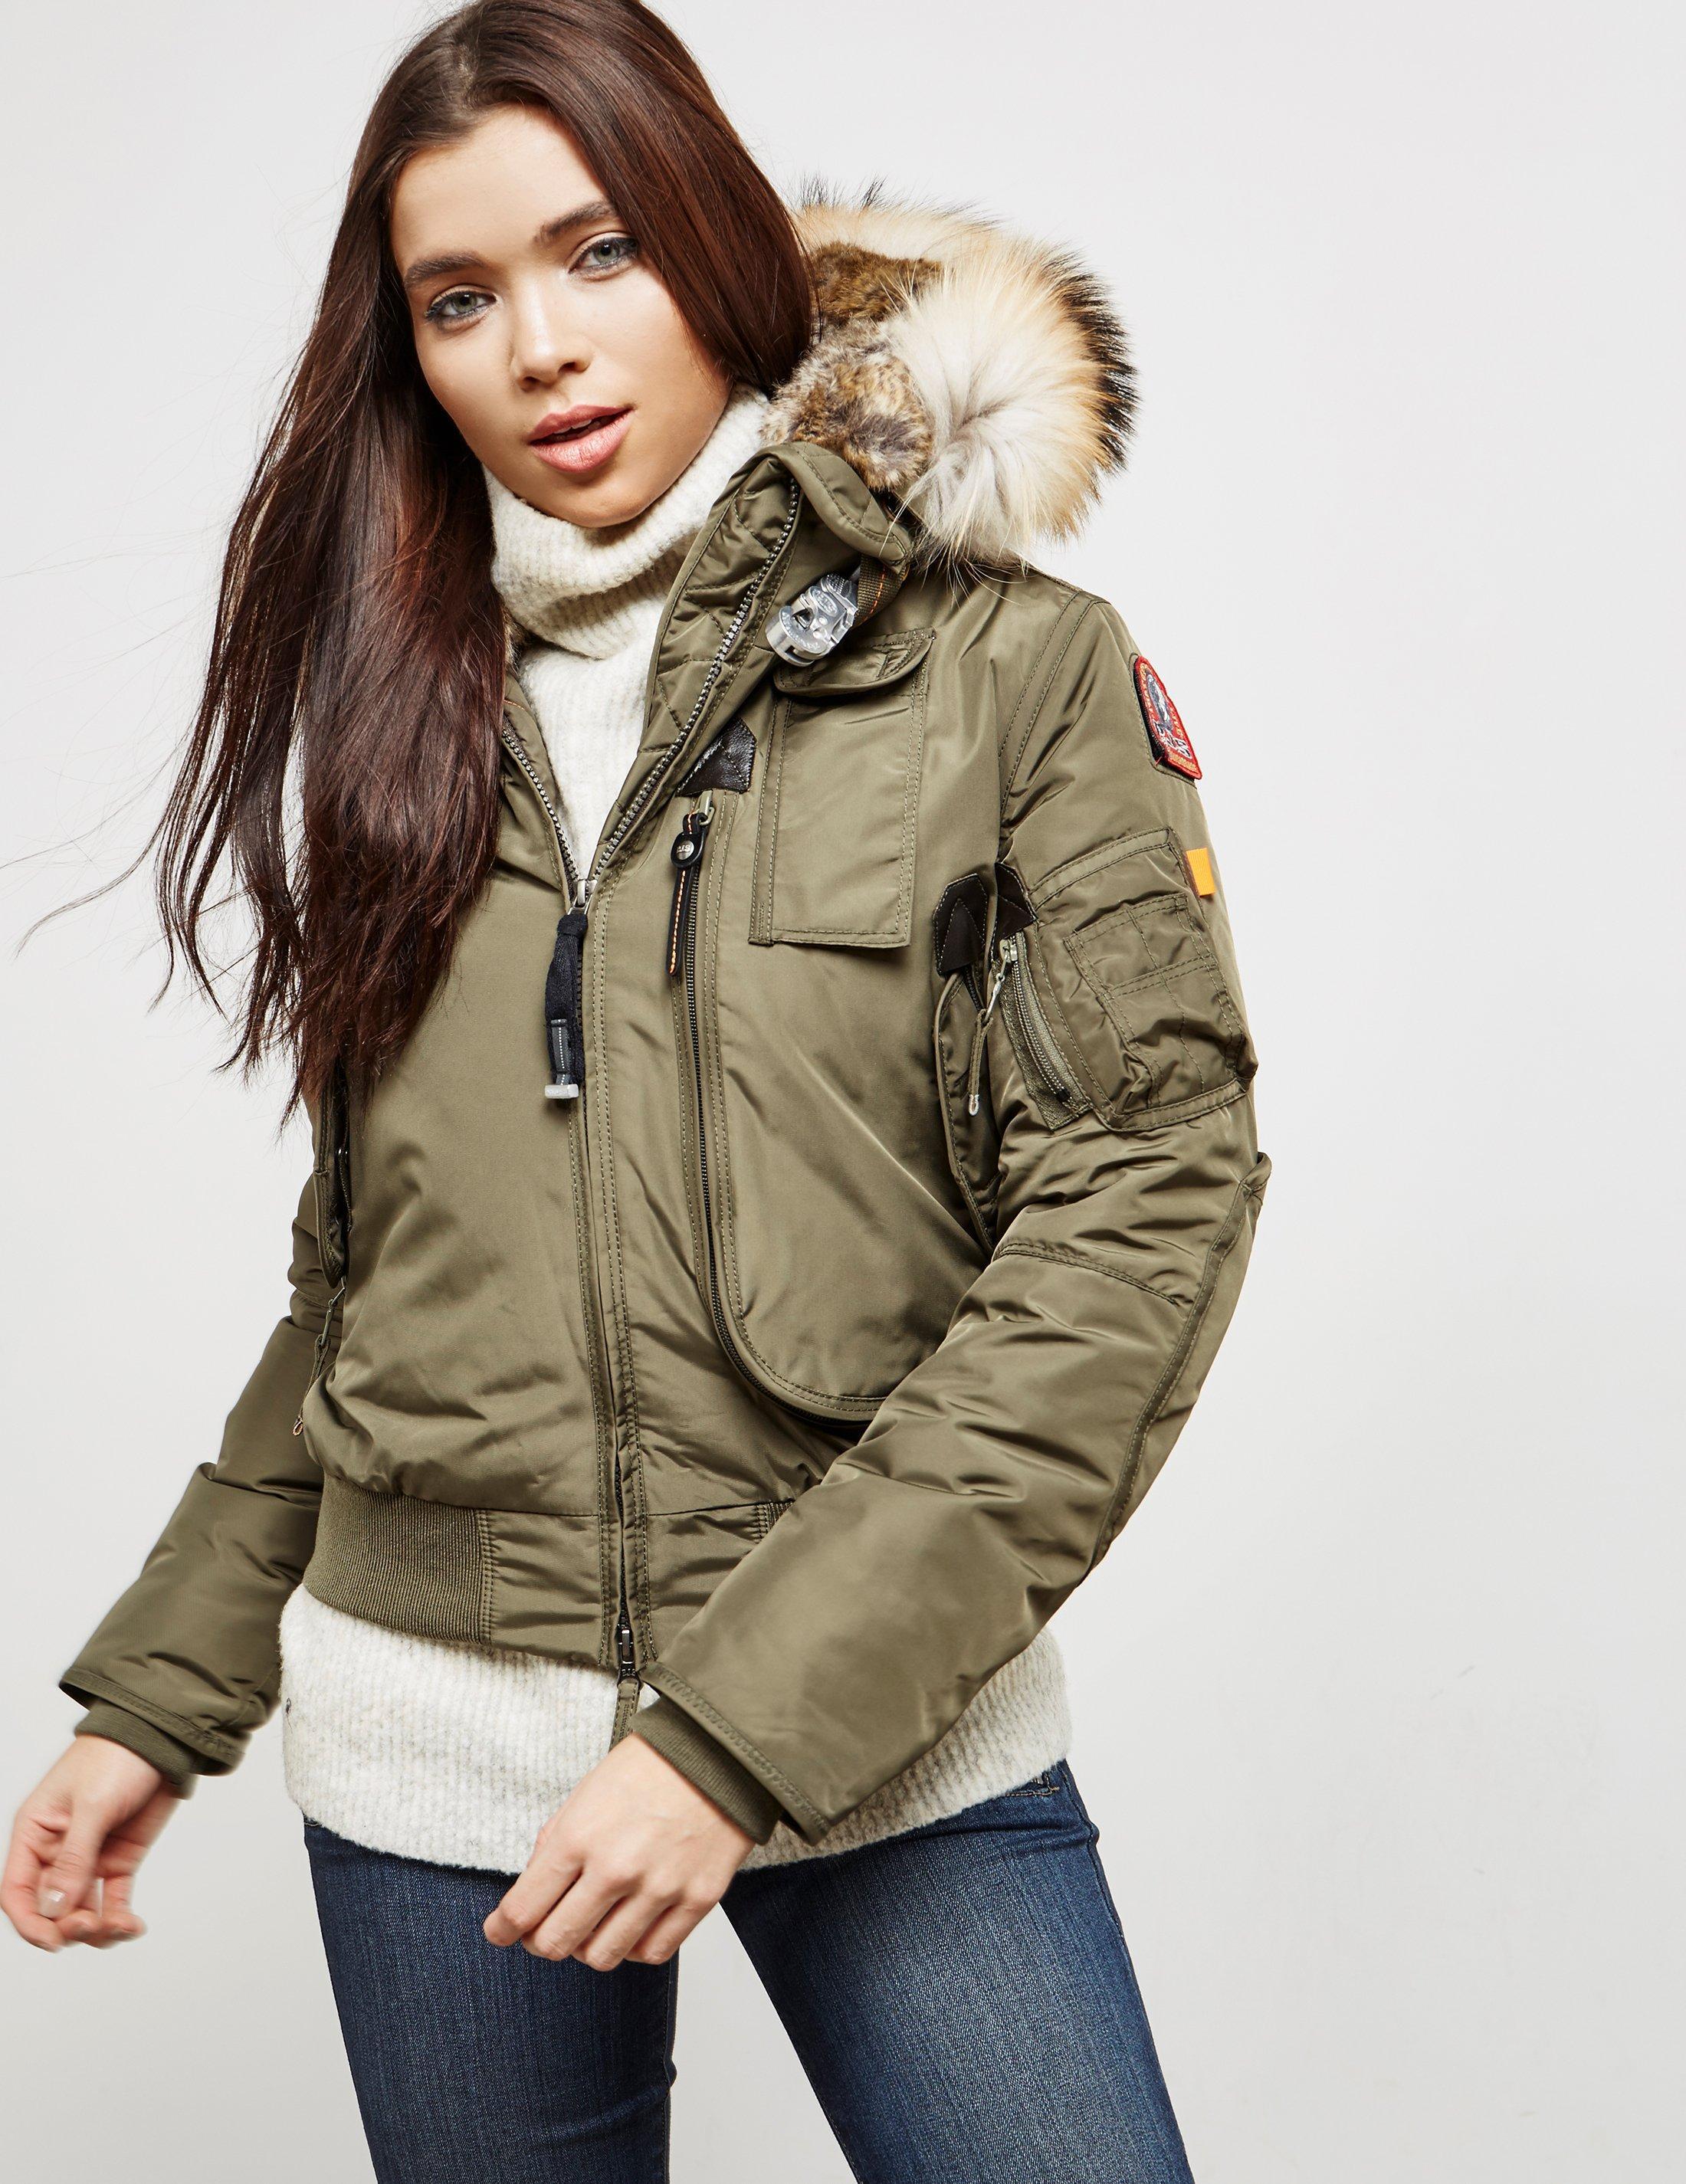 parajumpers bomber jacket women's